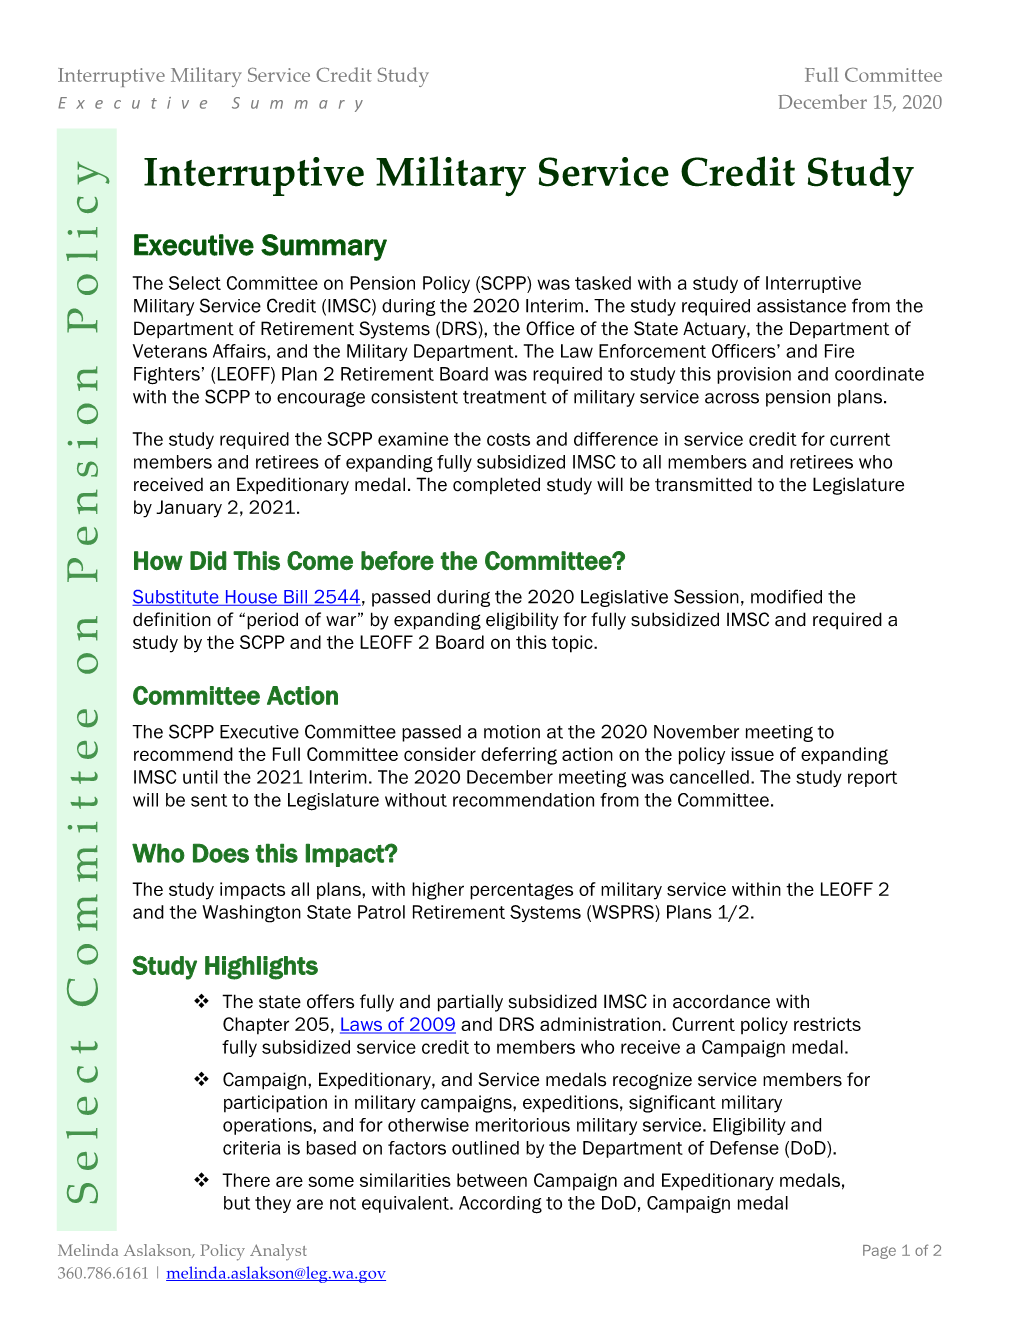 Interruptive Military Service Credit Study Full Committee Executive Summary December 15, 2020